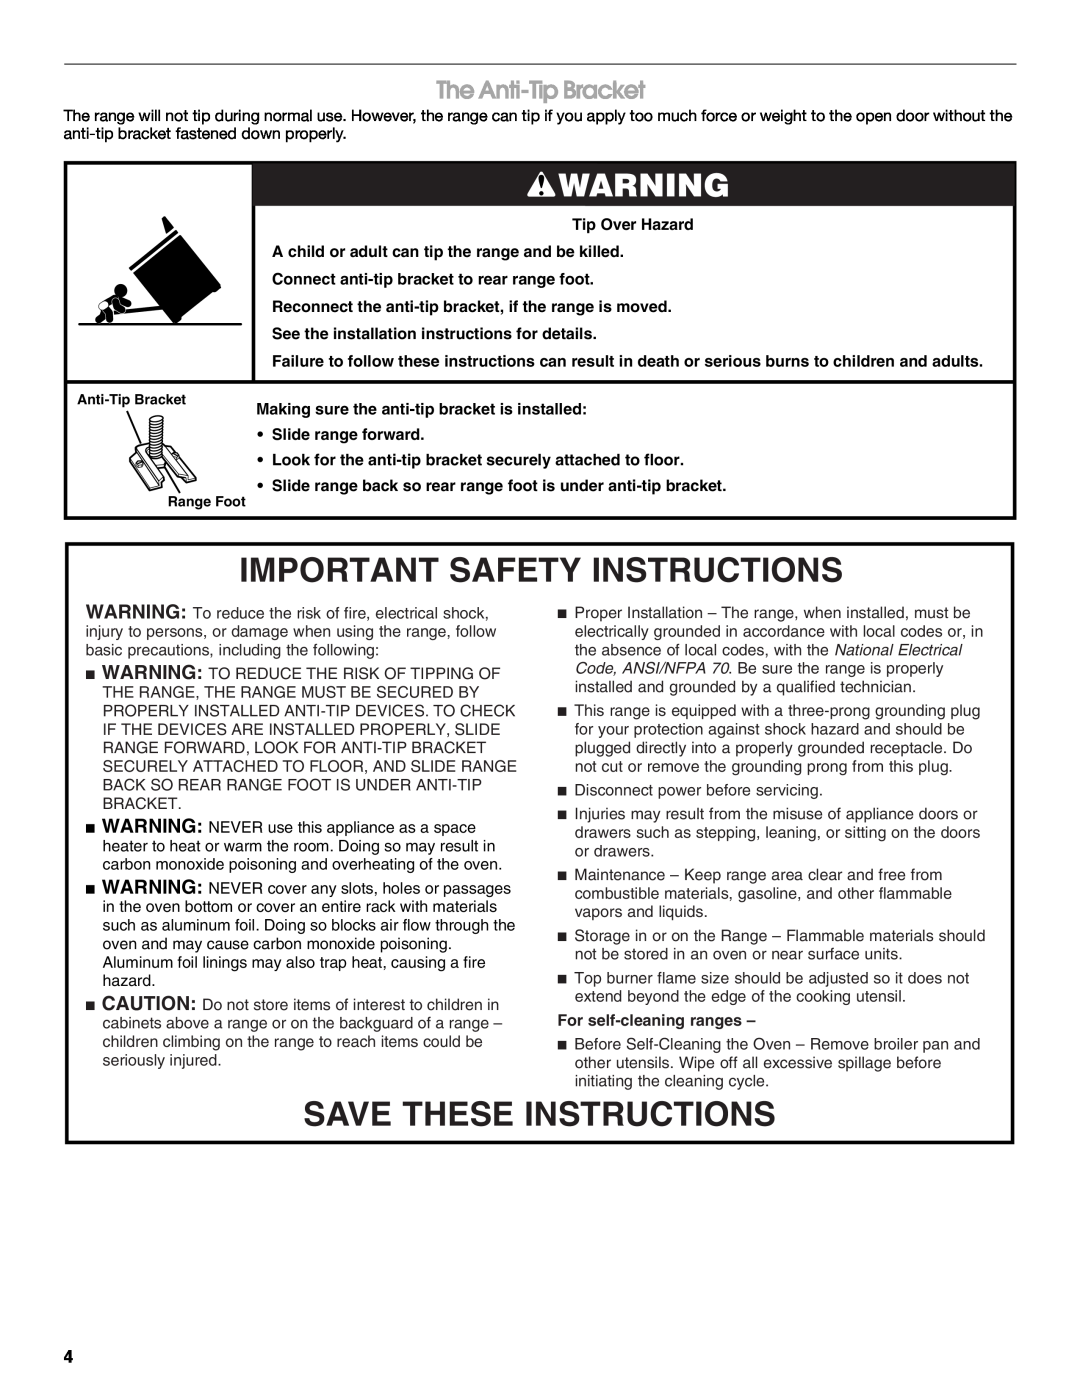 Amana W10320693A Important Safety Instructions, Save These Instructions, The Anti-Tip Bracket, For self-cleaning ranges 